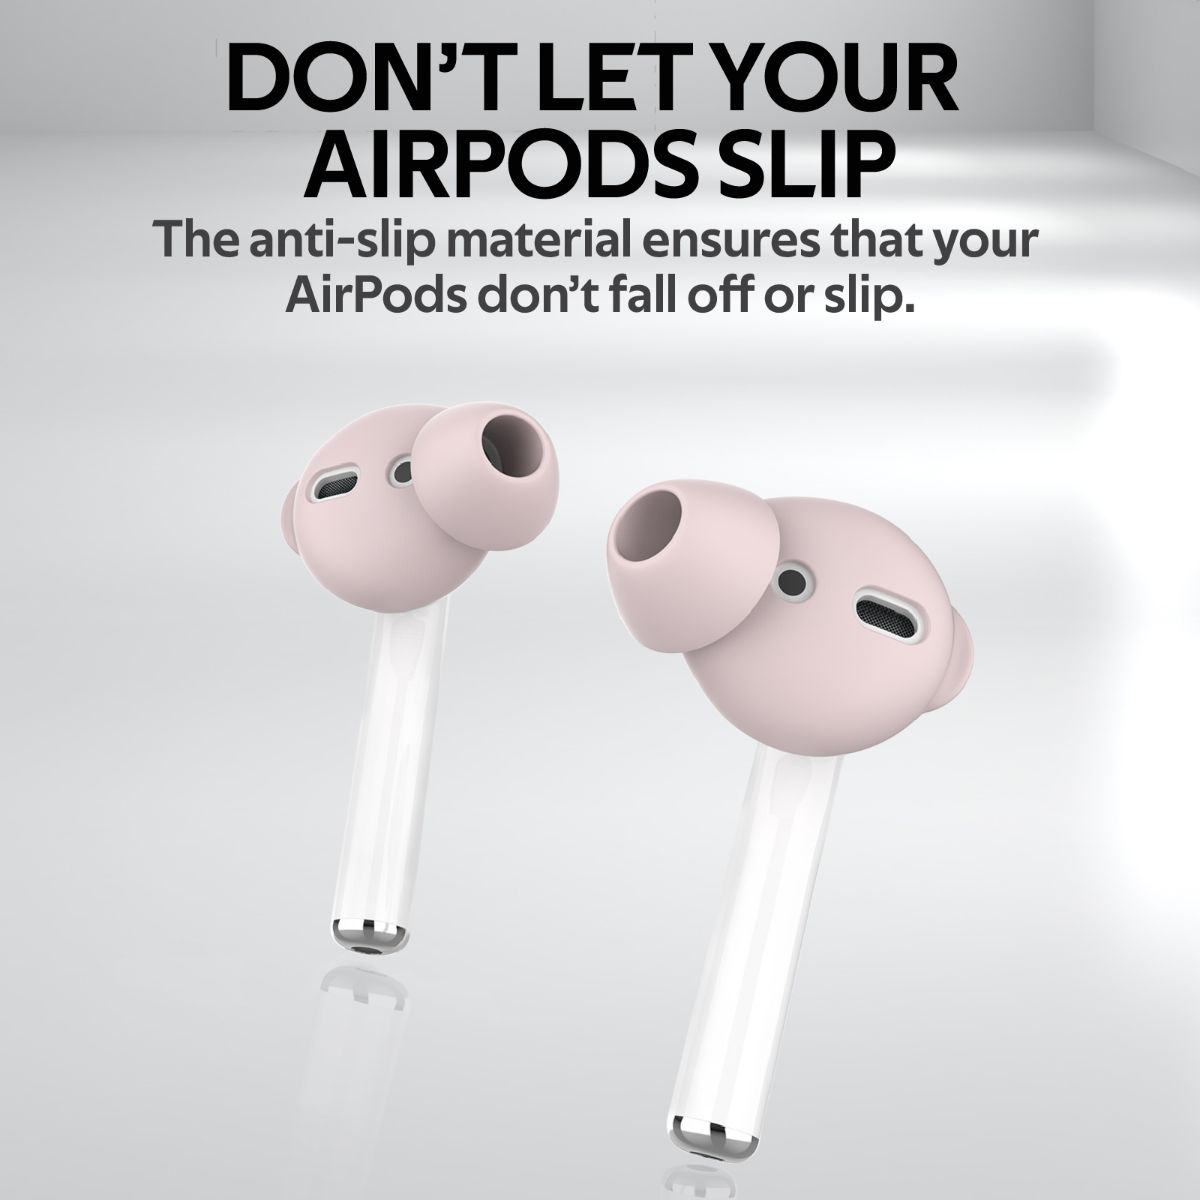 Promate AirPods Ear Tips, Ultra-Slim Silicone Anti-Slip Noise-Isolating Earbuds Cover with Anti-Slip Sweat-Resistant Design and Silicone Carrying Pouch for Apple AirPods and AirPods 2, PodSkin Pink